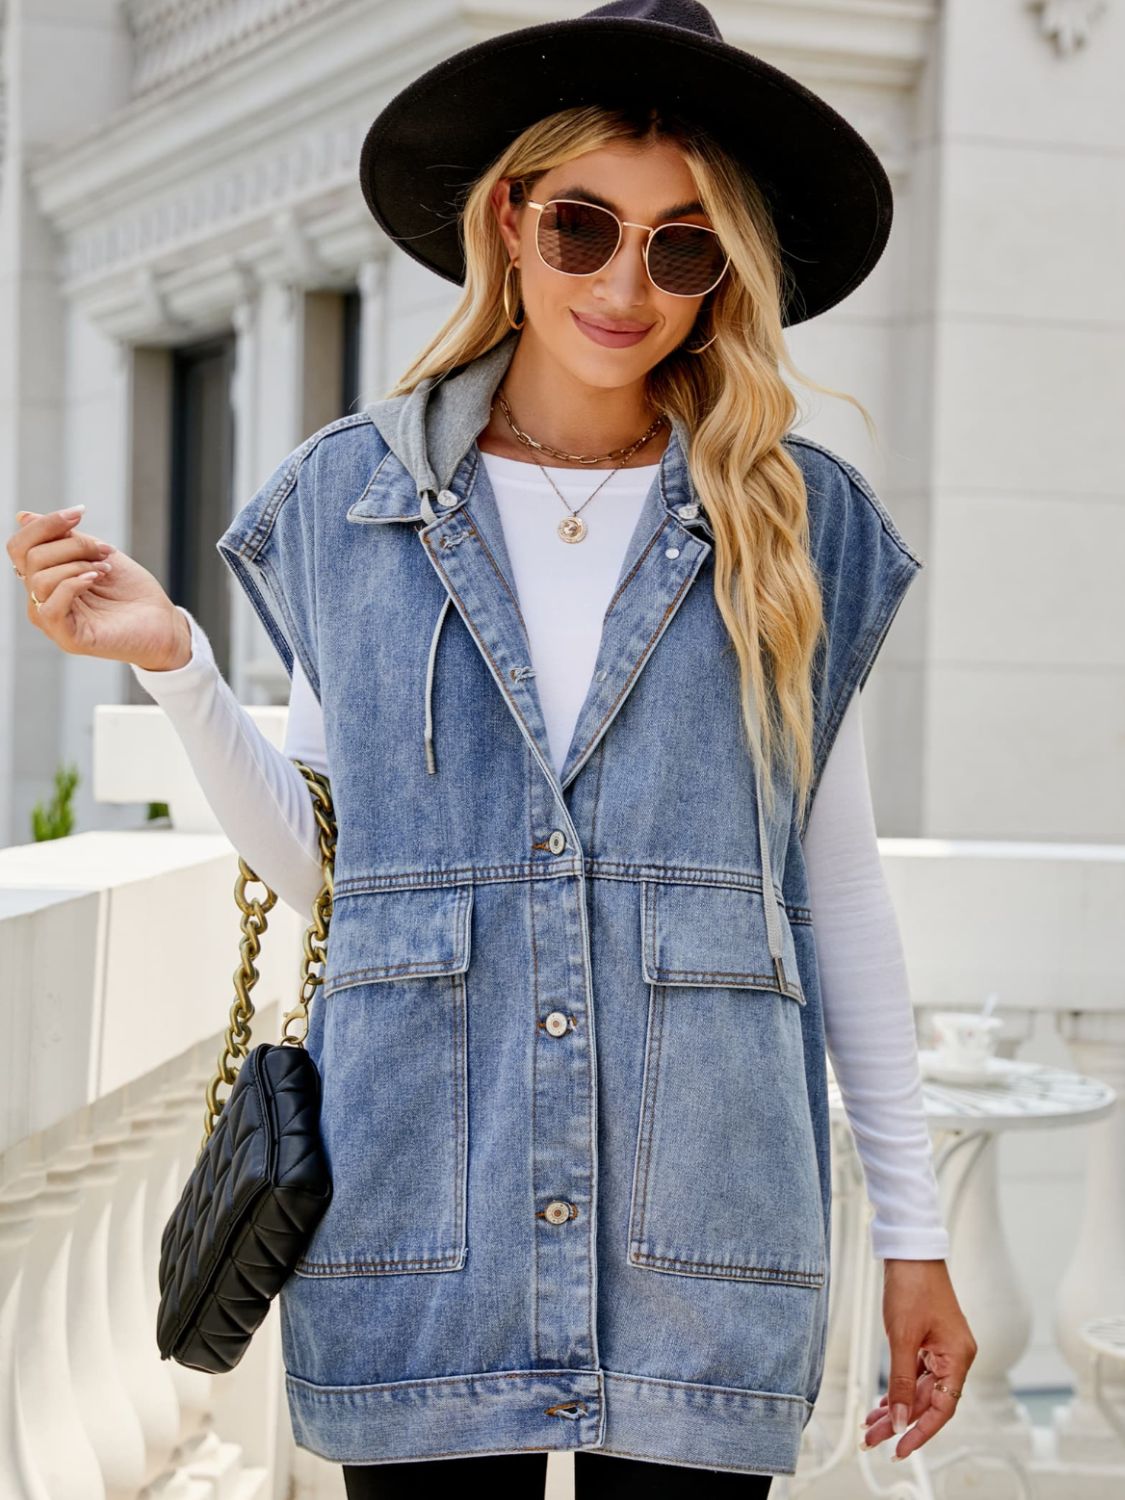 Gray Hooded Sleeveless Denim Top with Pockets Sentient Beauty Fashions denim